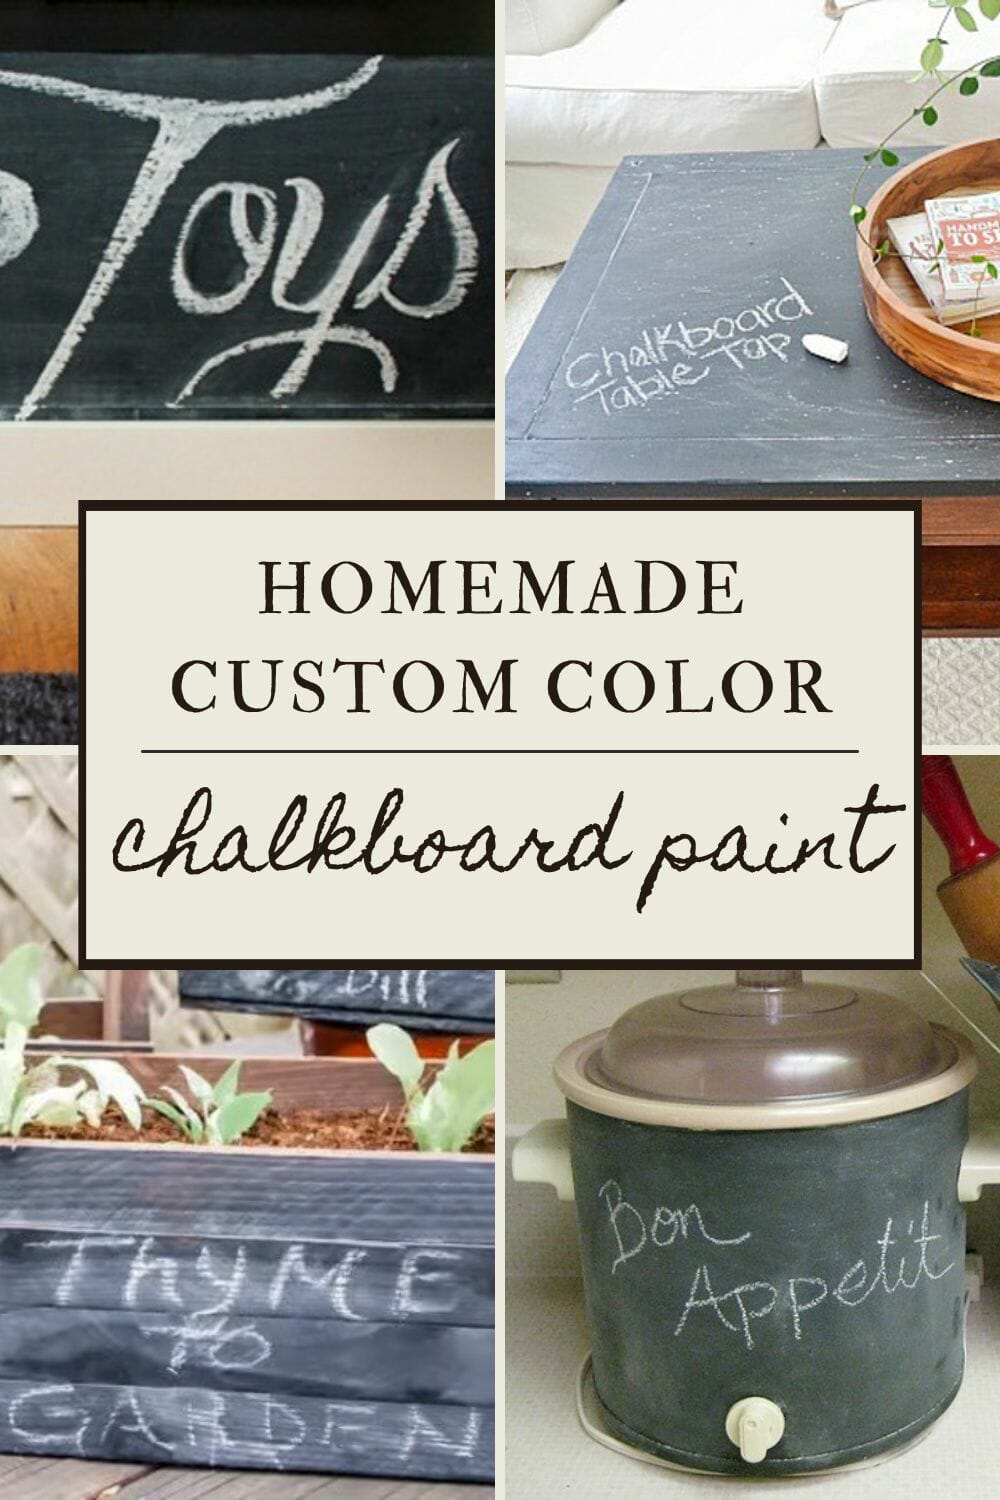 A pinterest-friendly graphic for my homemade chalkboard paint tutorial.